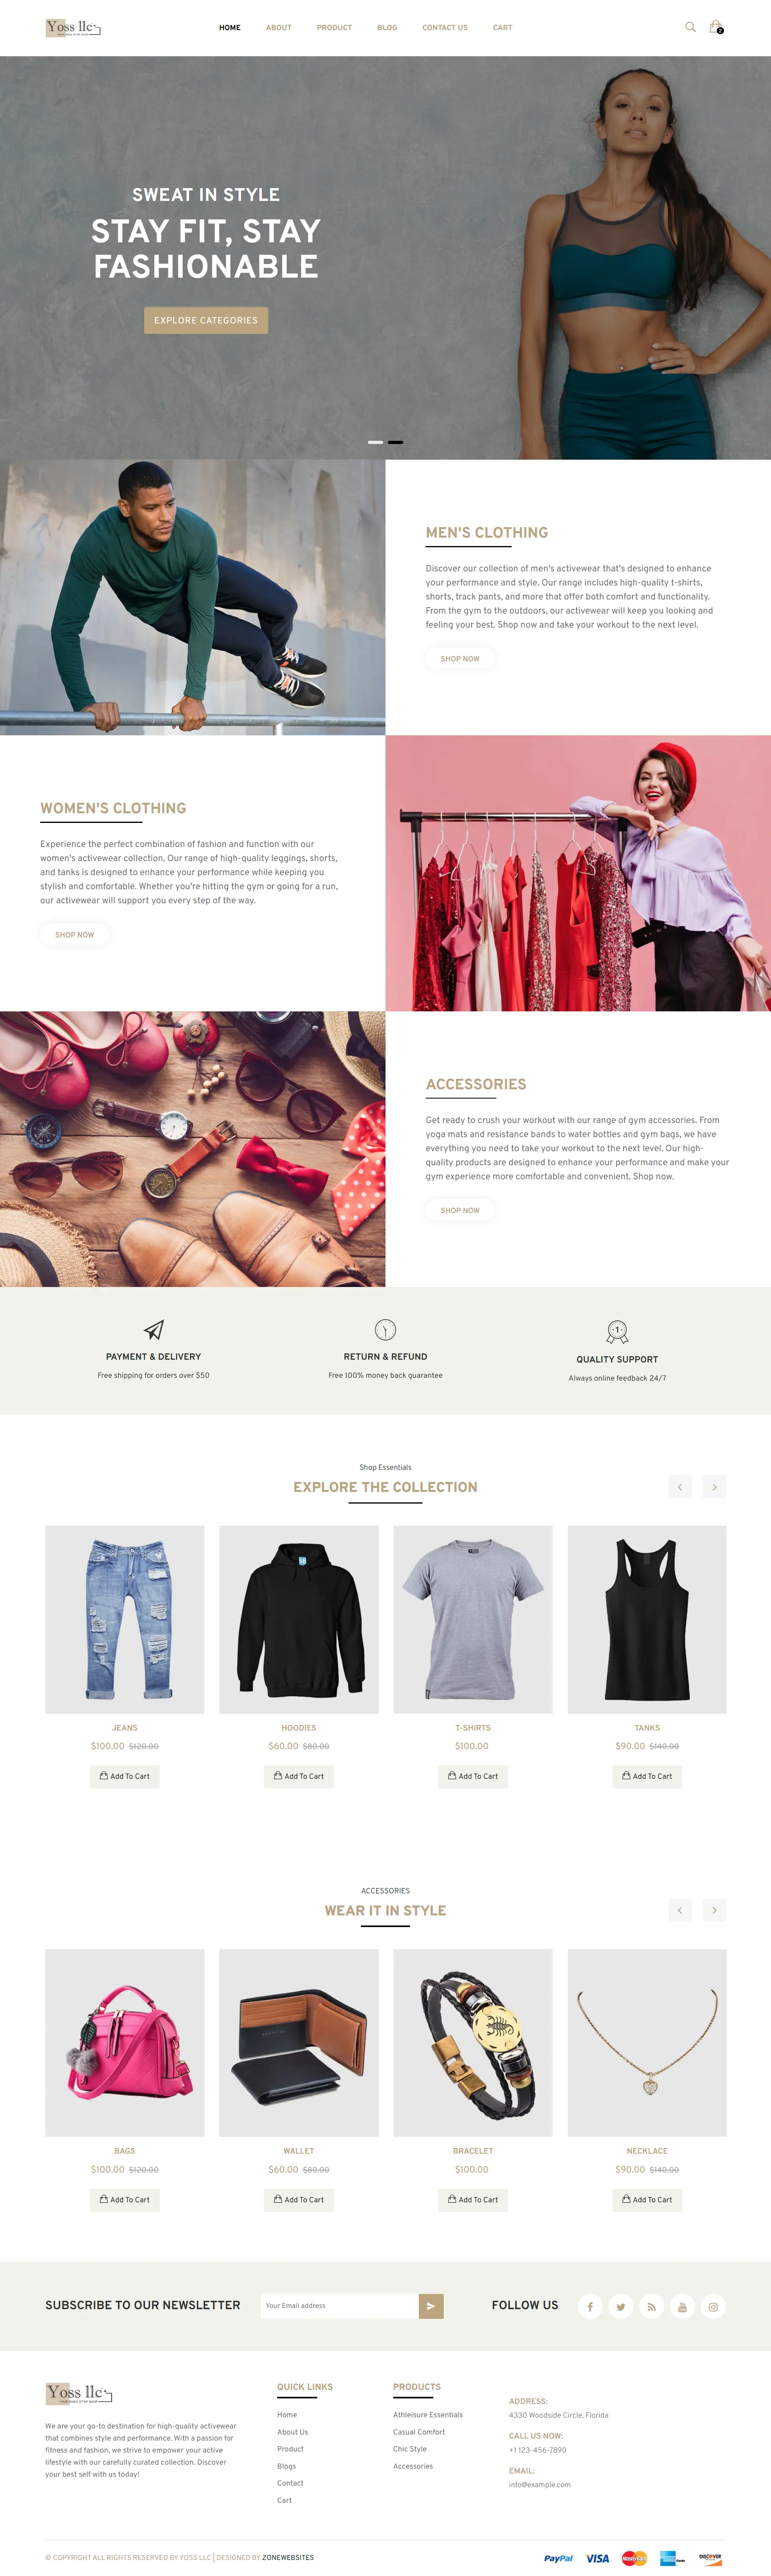 Fashion Brand & Clothing Website Layout for Success